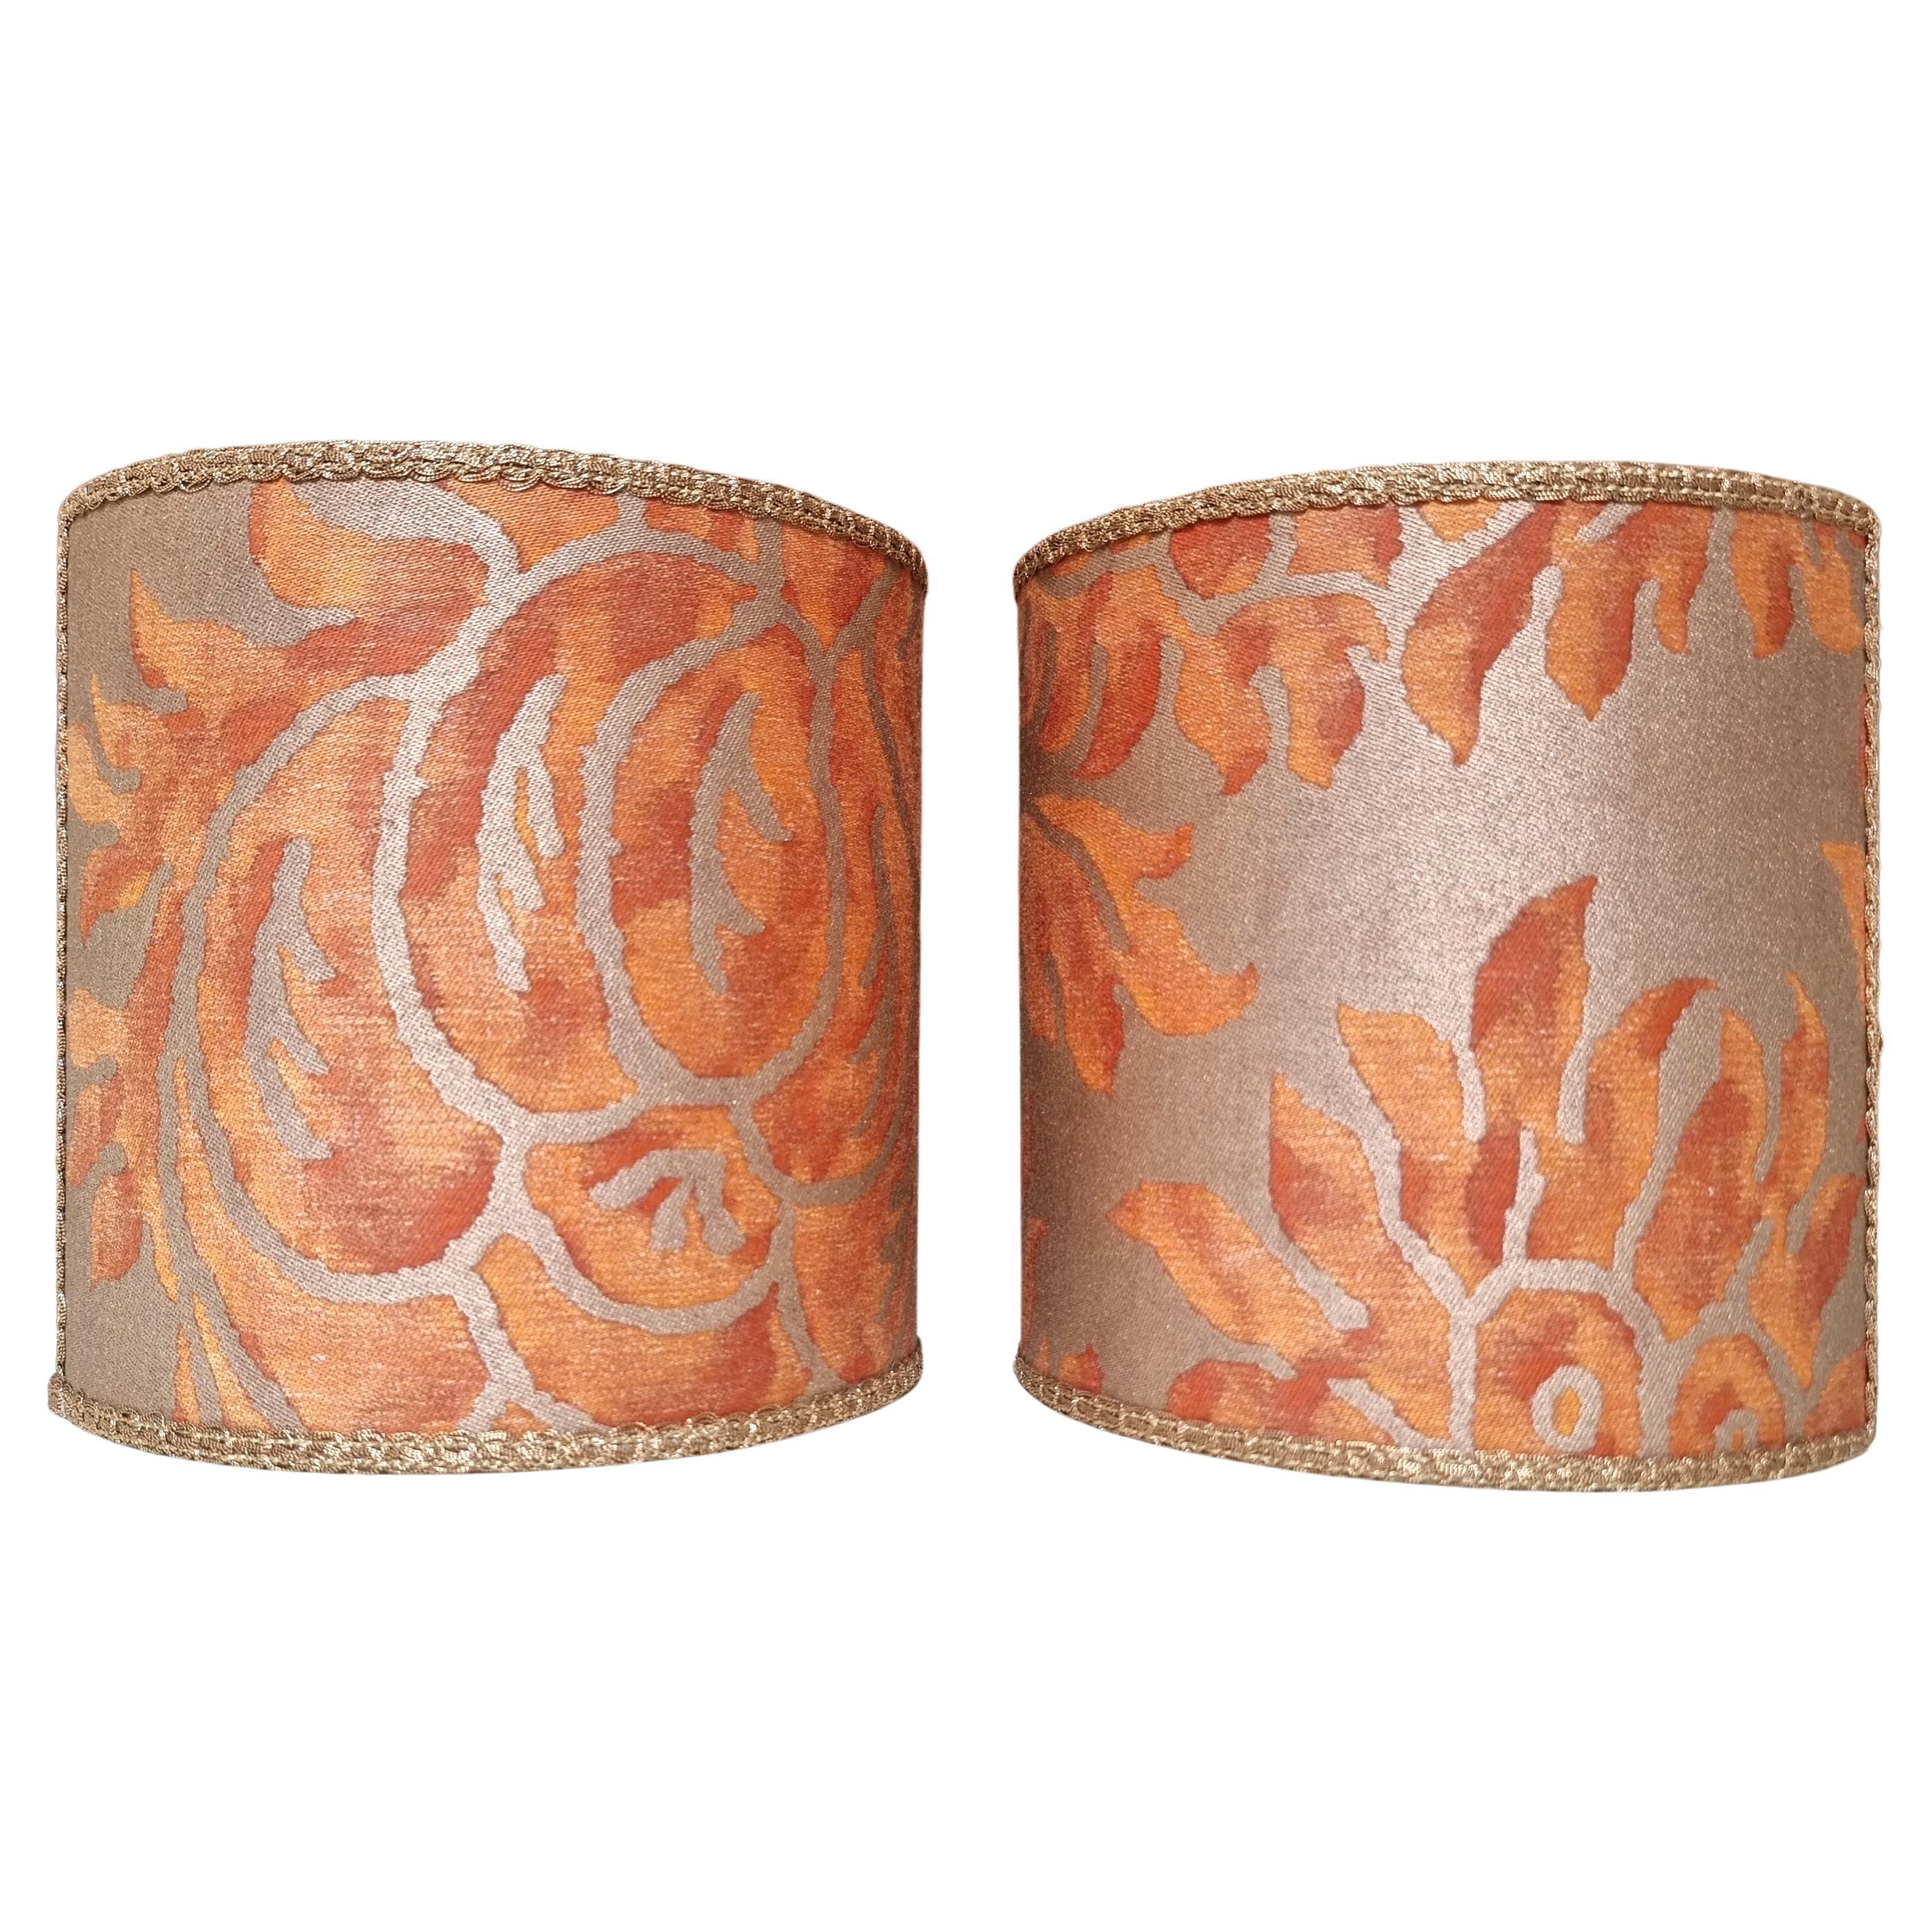 This pretty set of 2 clip on wall sconce half drum lampshades with a fitting that clips over the light bulb is handmade using Fortuny fabric - Barberini pattern - in burnt apricot & silvery gold color, finished with gold trim. Suitable for